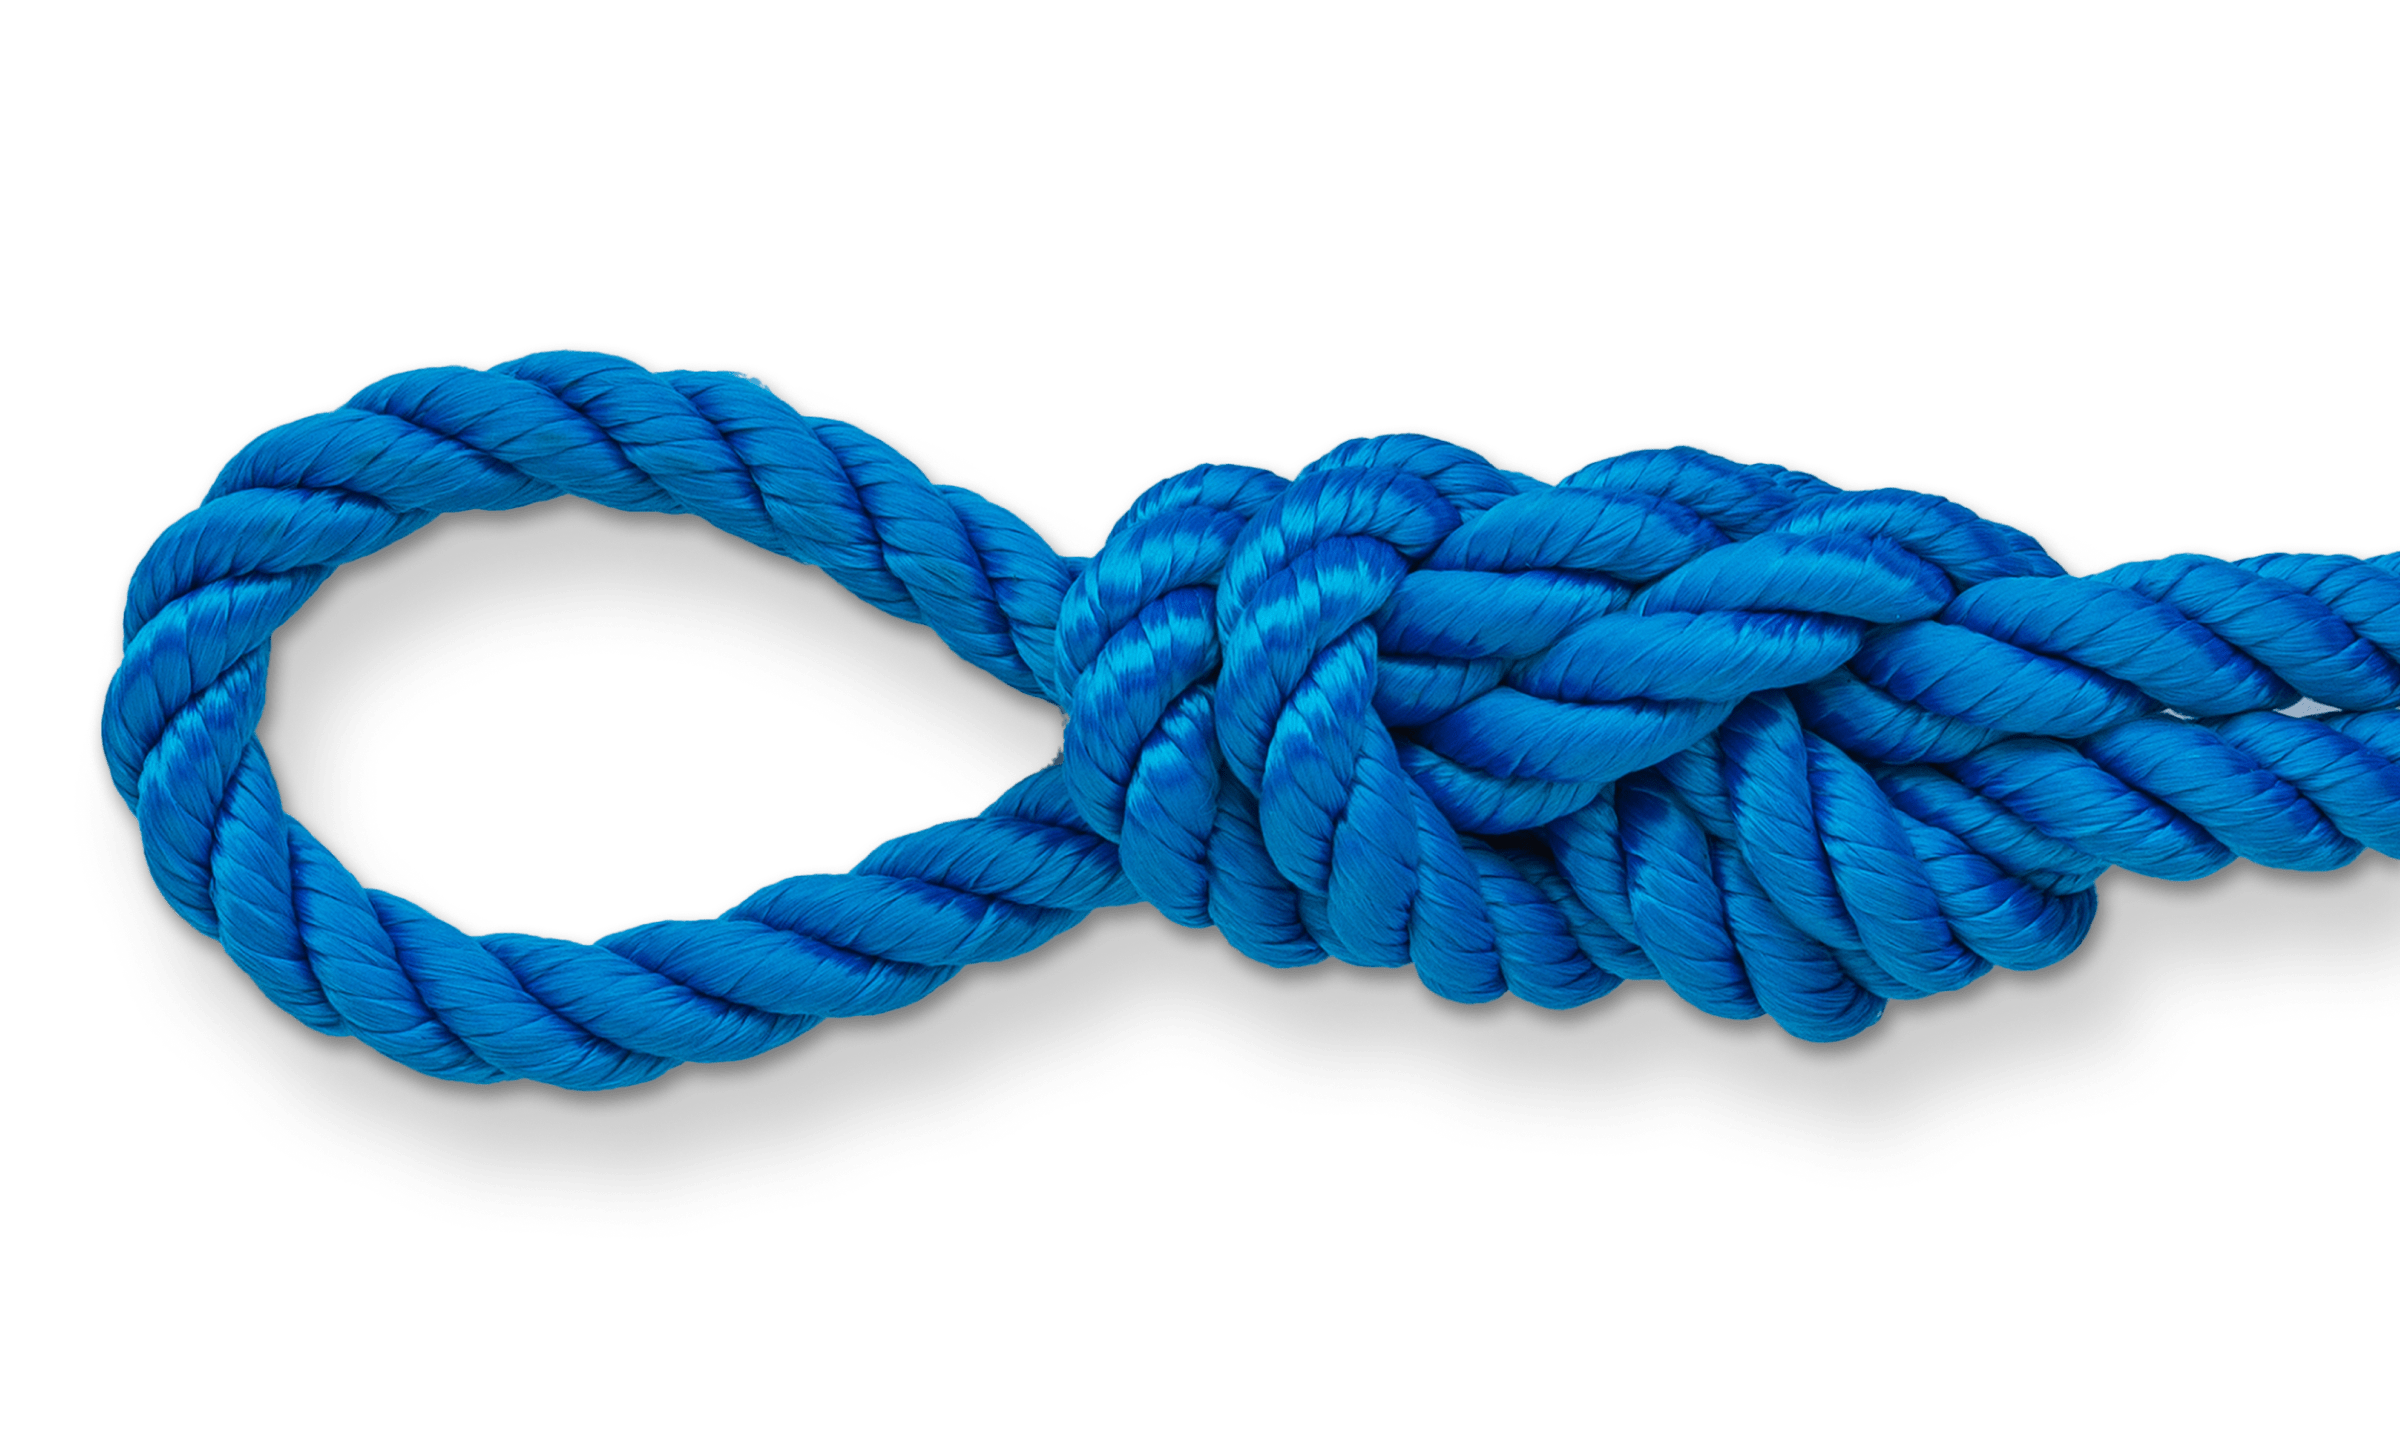 3-strand twisted royal blue rope